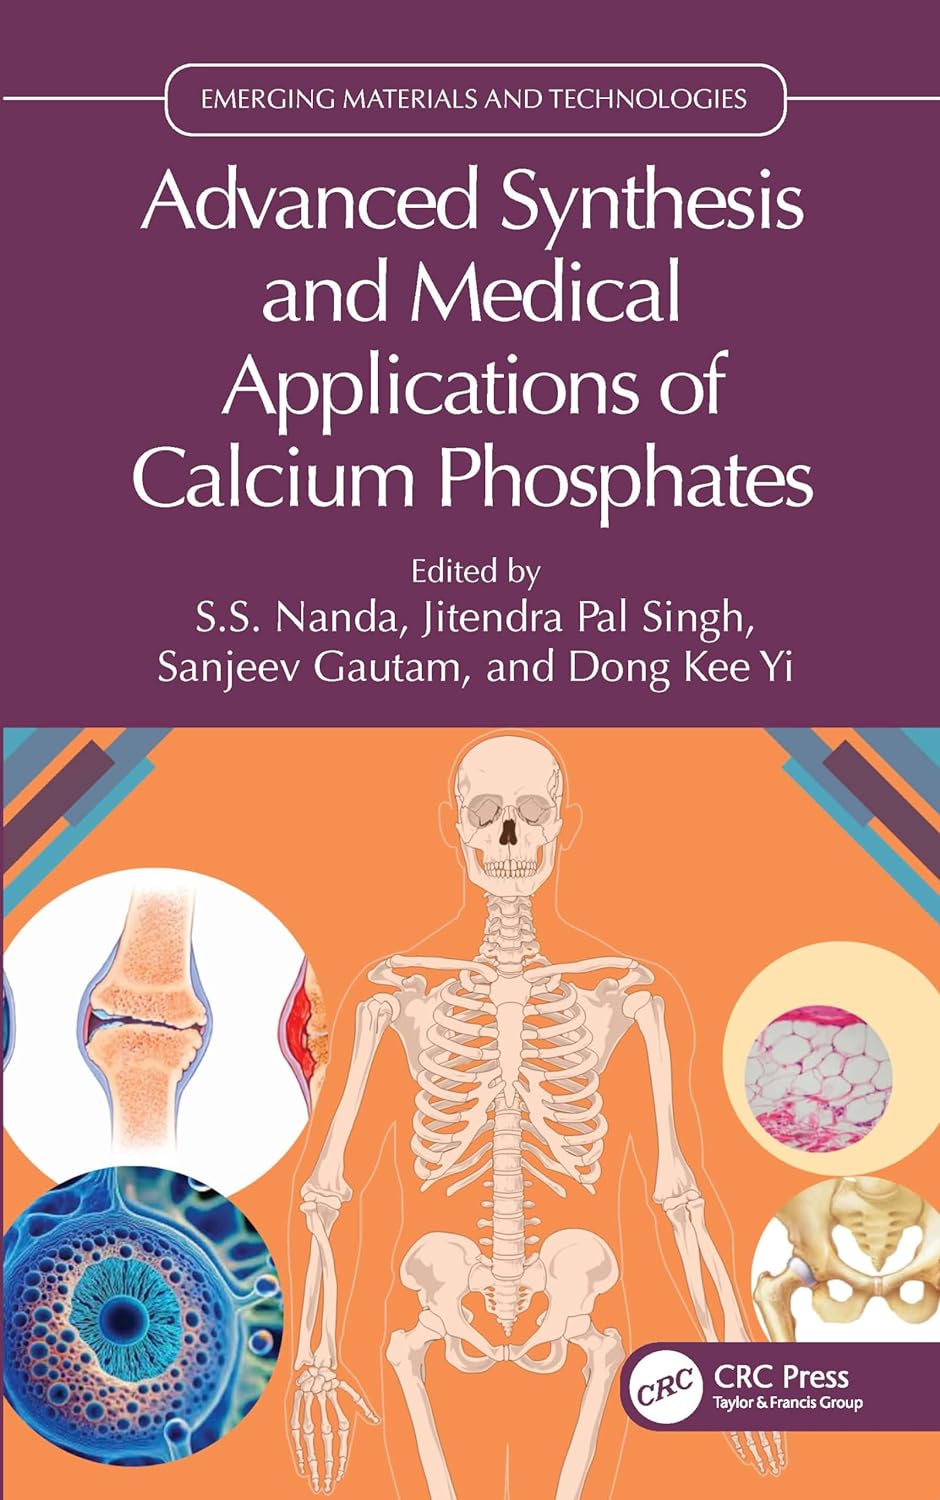 (EBook PDF)Advanced Synthesis and Medical Applications of Calcium Phosphates (Emerging Materials and Technologies) by S.S. Nanda, Jitendra Pal Singh, Sanjeev Gautam, Dong Kee Yi